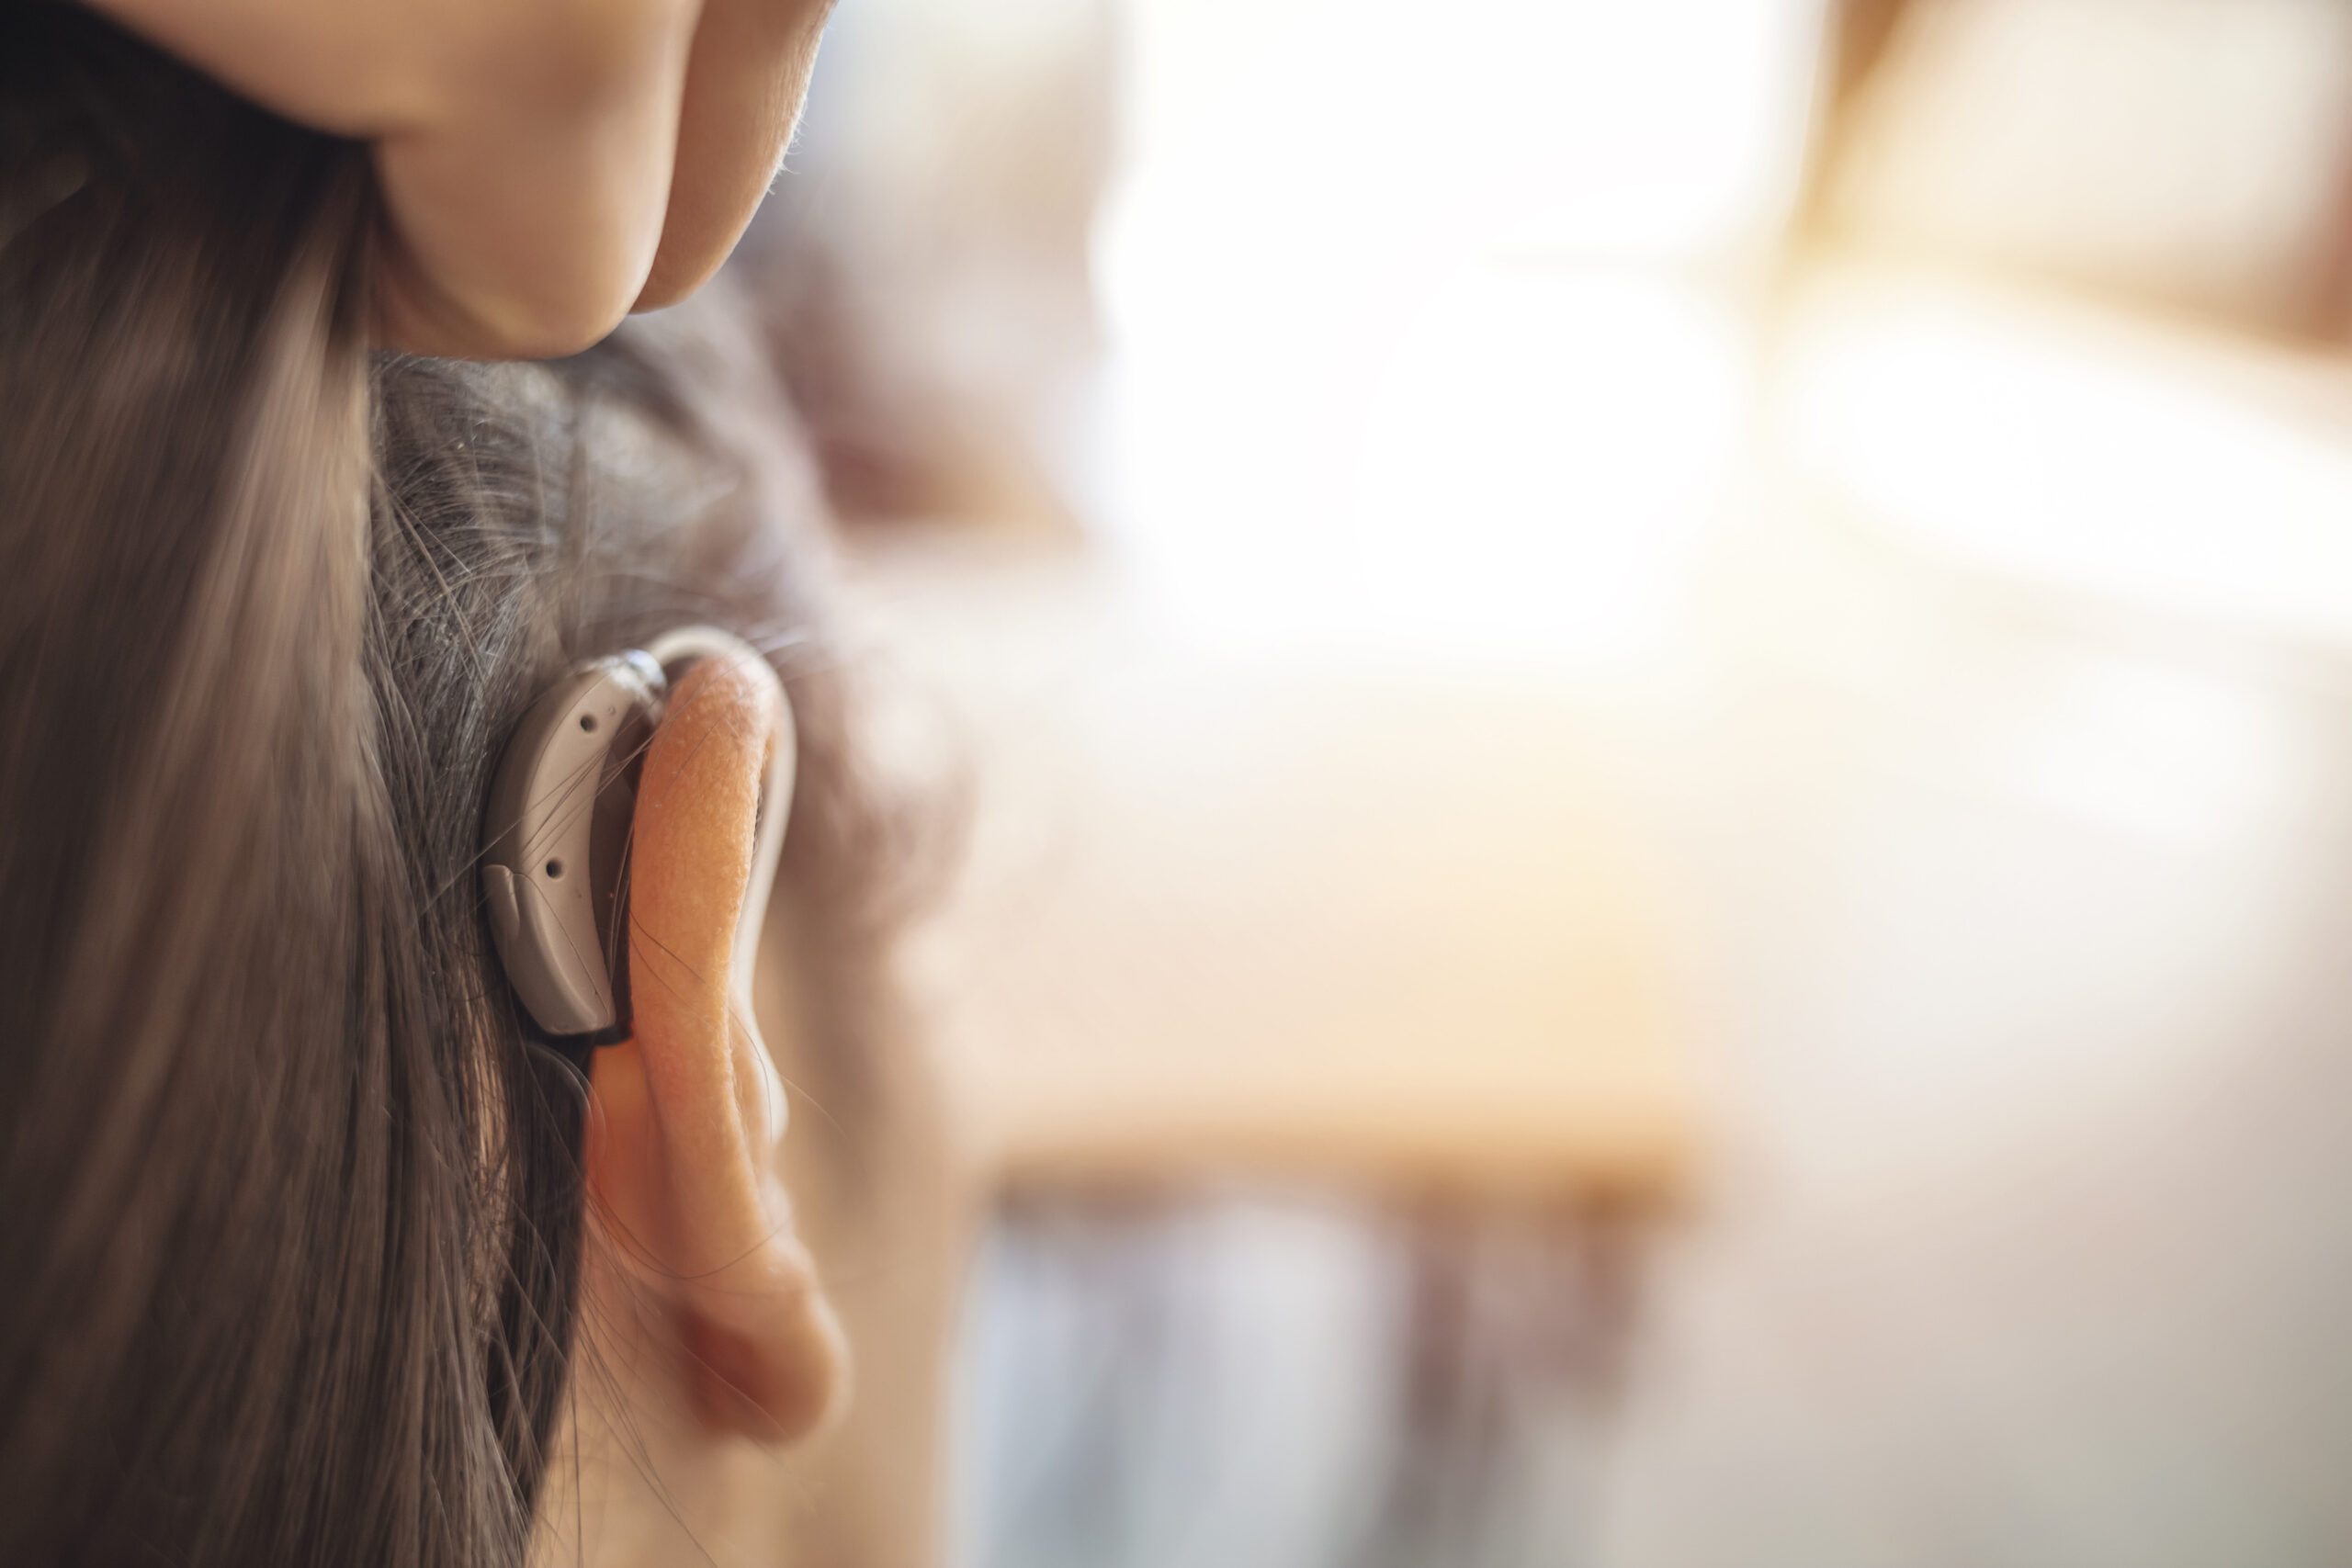 A woman pushes her hair back to put focus on a hearing aid in her ear.